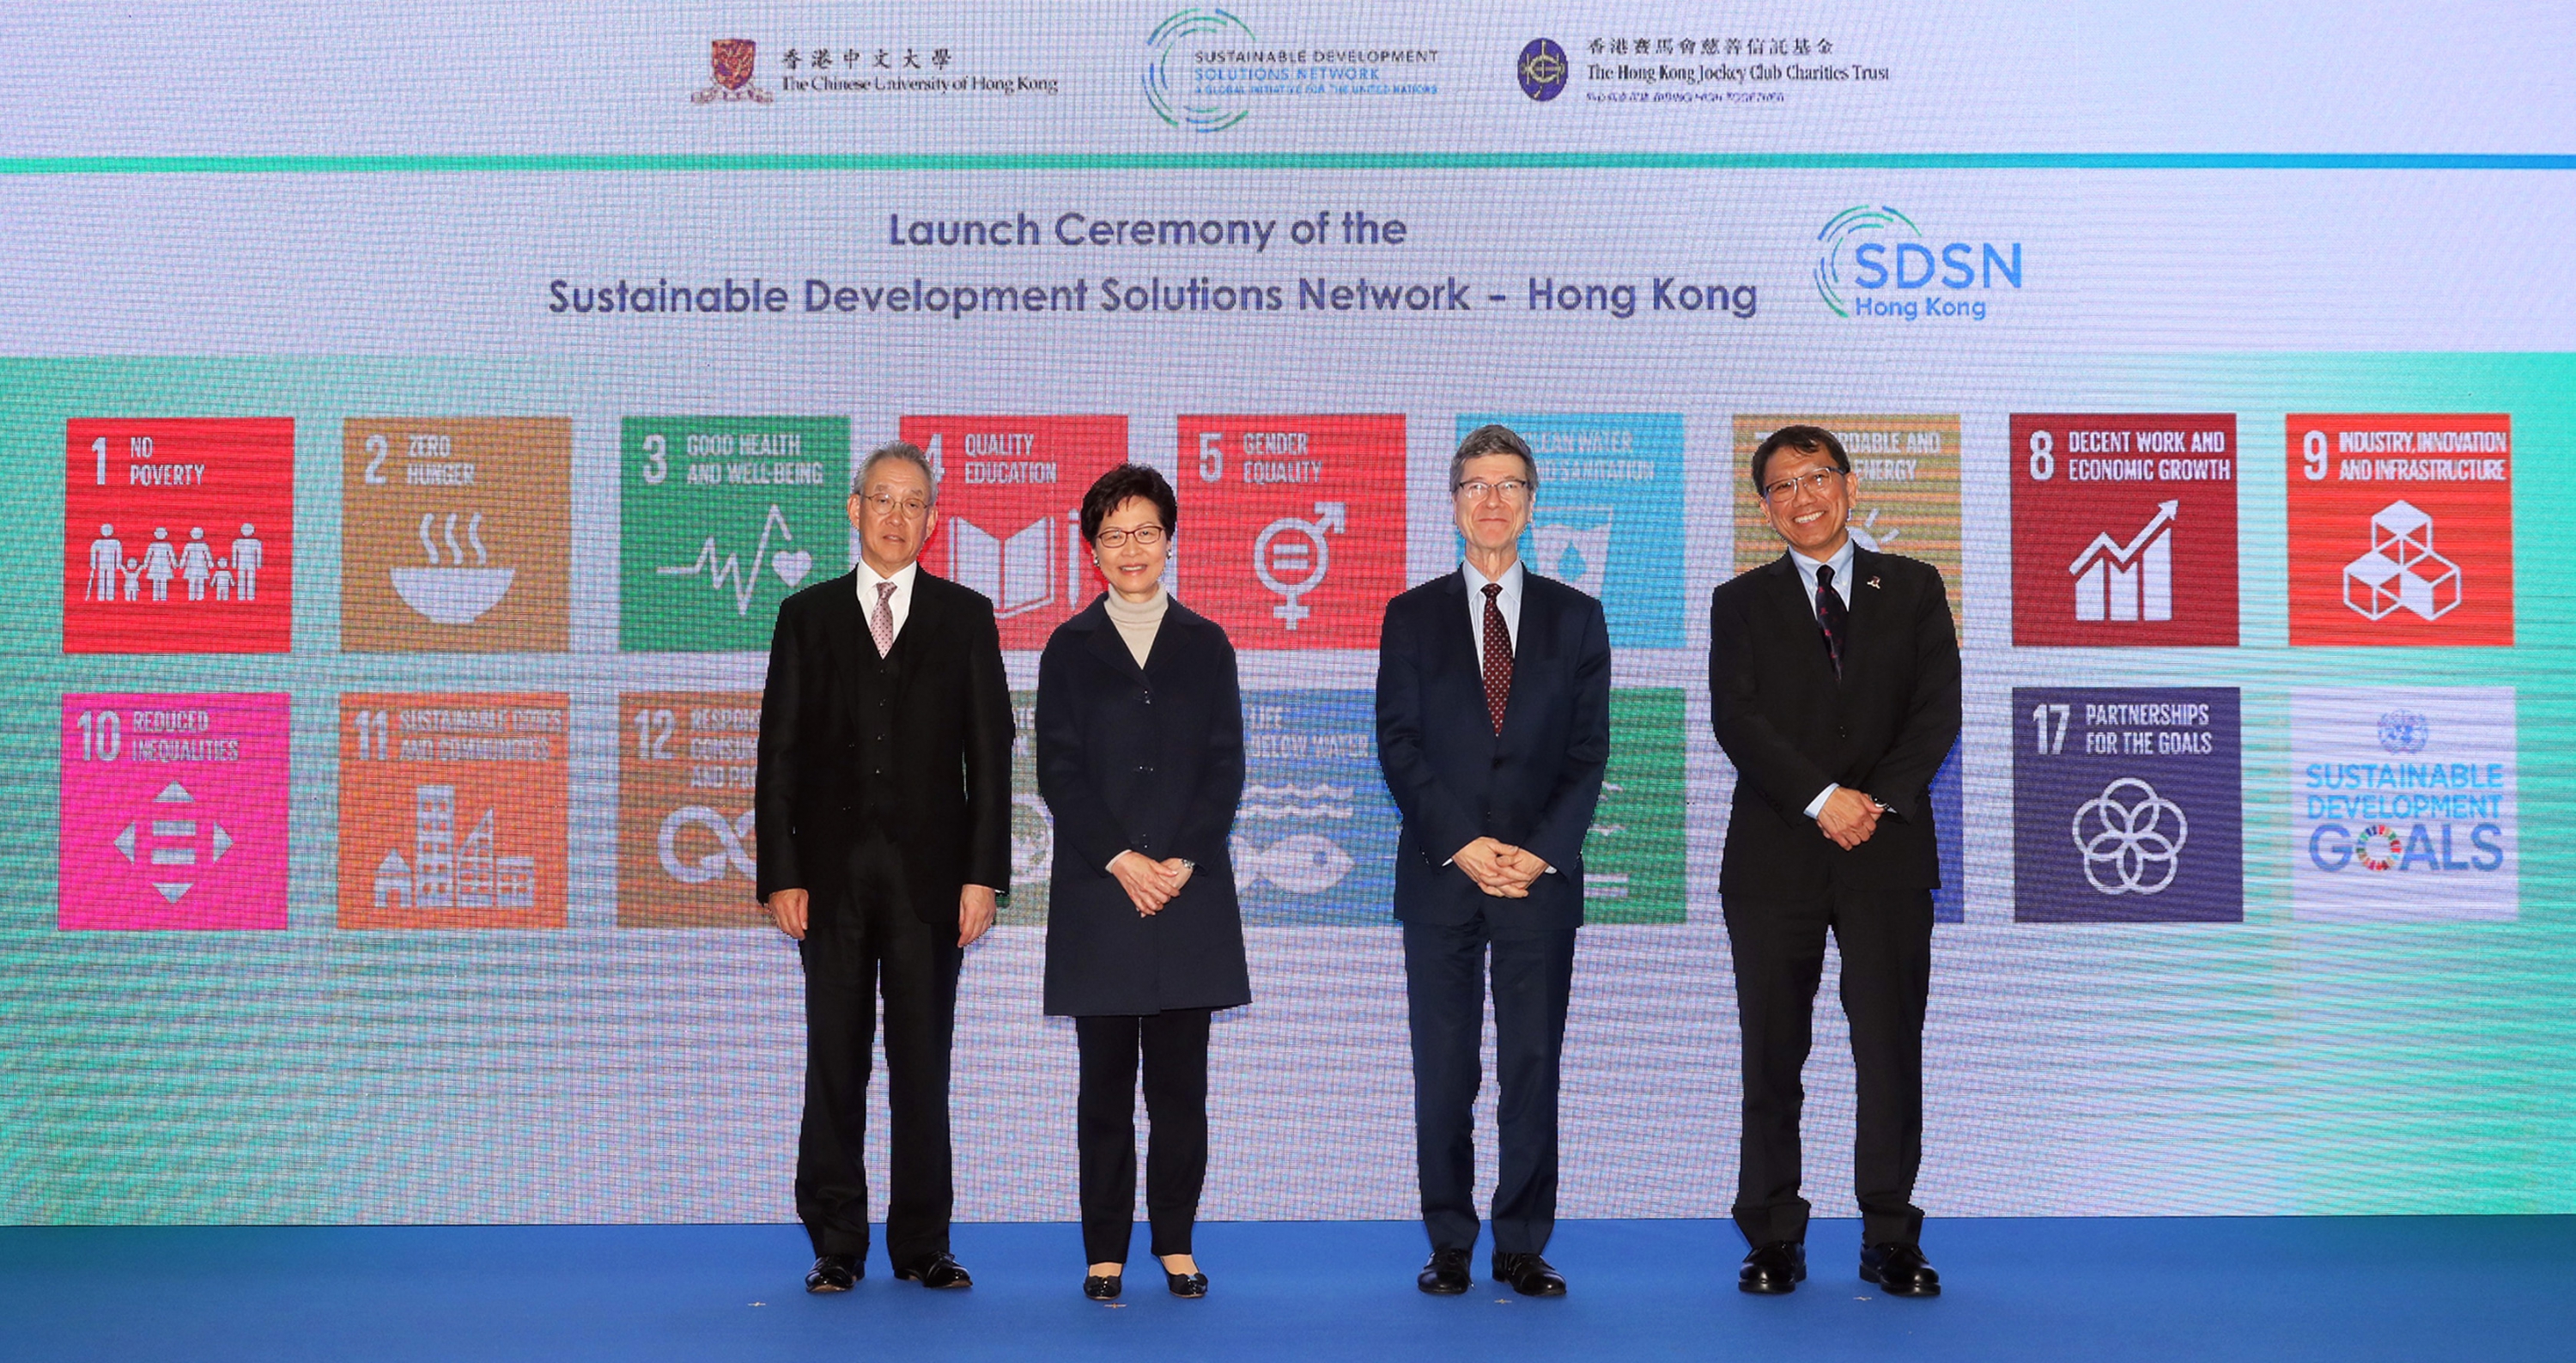 Officiating at the launch ceremony of the Sustainable Development Solutions Network Hong Kong are The Chief Executive of the Hong Kong Special Administrative Region Mrs Carrie Lam Cheng Yuet-ngor (2nd left); Director of the UN SDSN Professor Jeffrey Sachs (2nd right); Deputy Chairman of The Hong Kong Jockey Club Mr Anthony W K Chow (1st left), and Vice-Chancellor and President of CUHK Professor Rocky S Tuan (1st right)